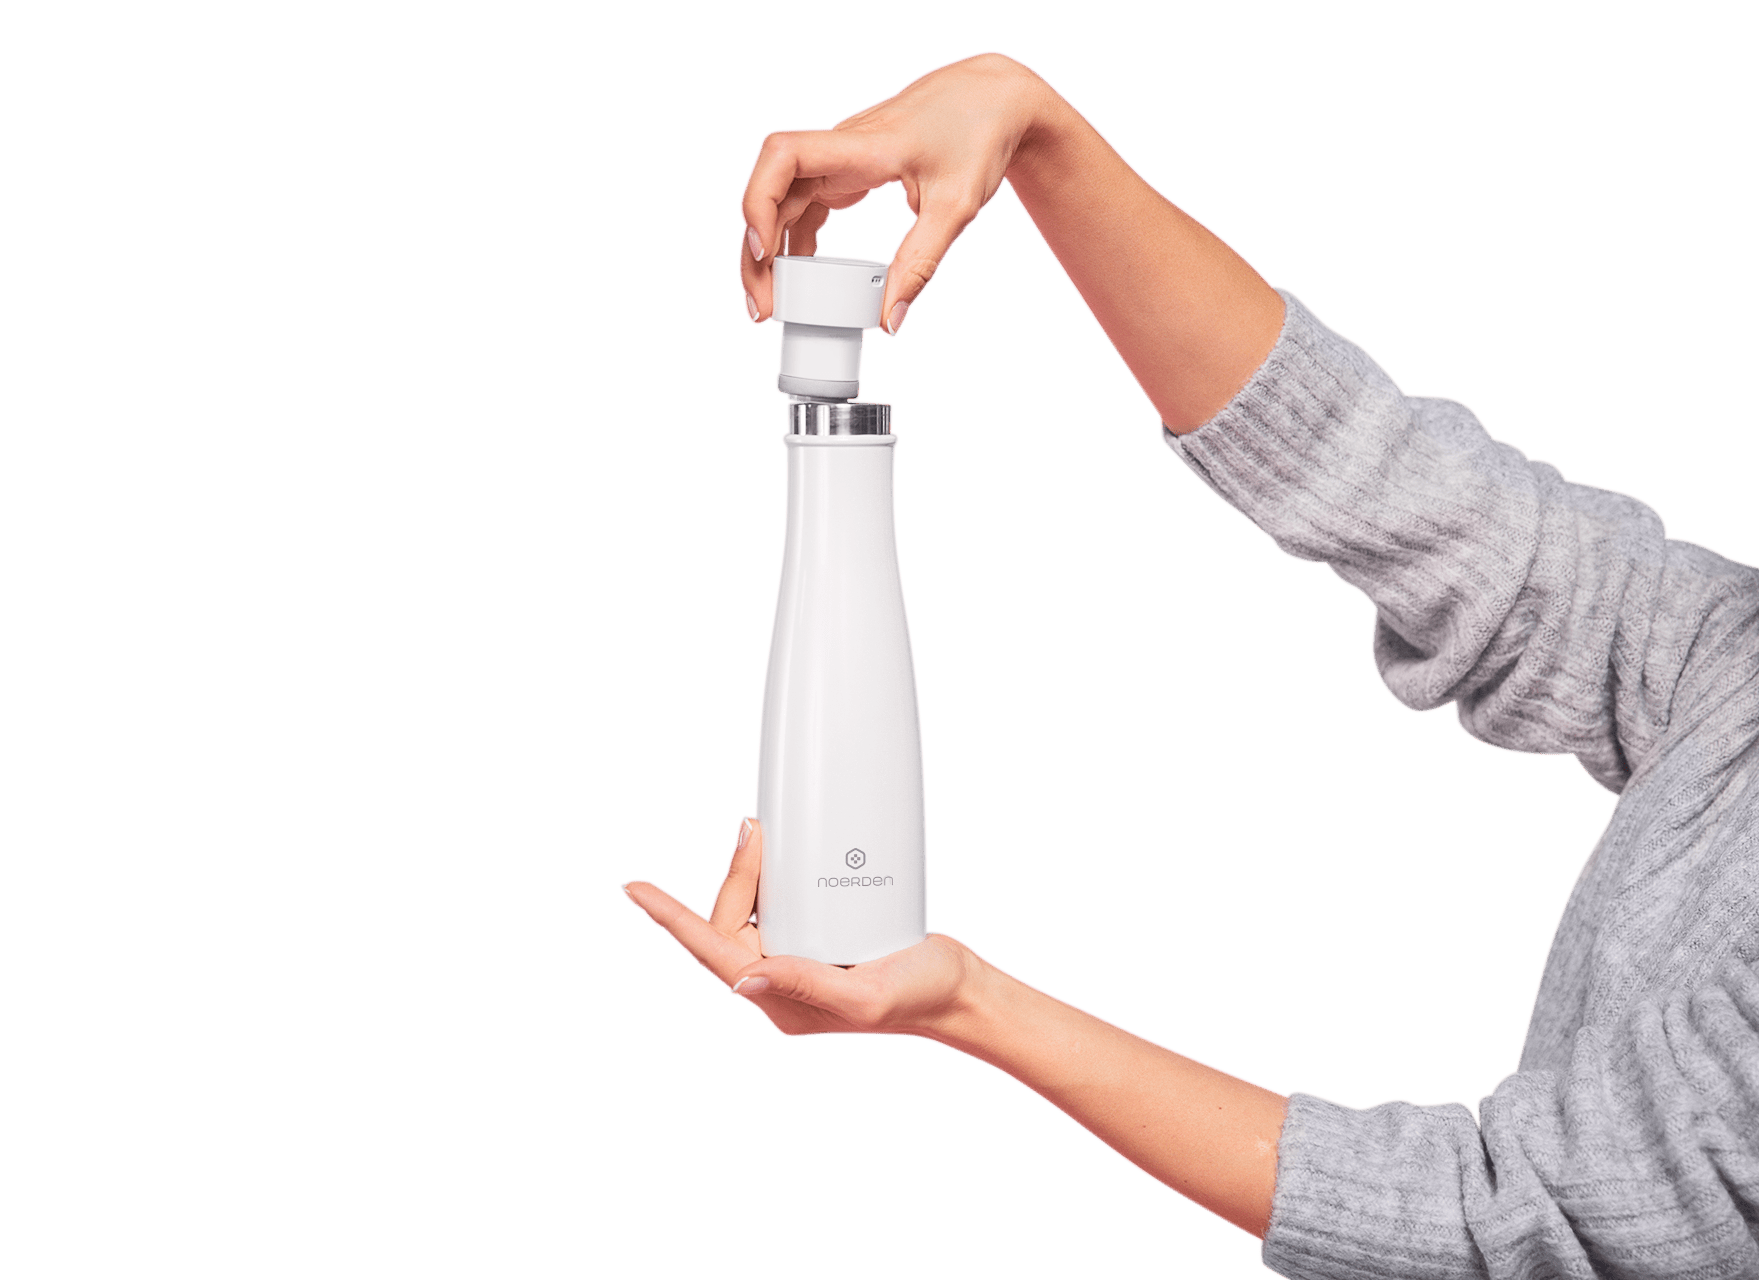 LIZ, the Smartest Self-Cleaning Bottle Launchs July 30, 2019